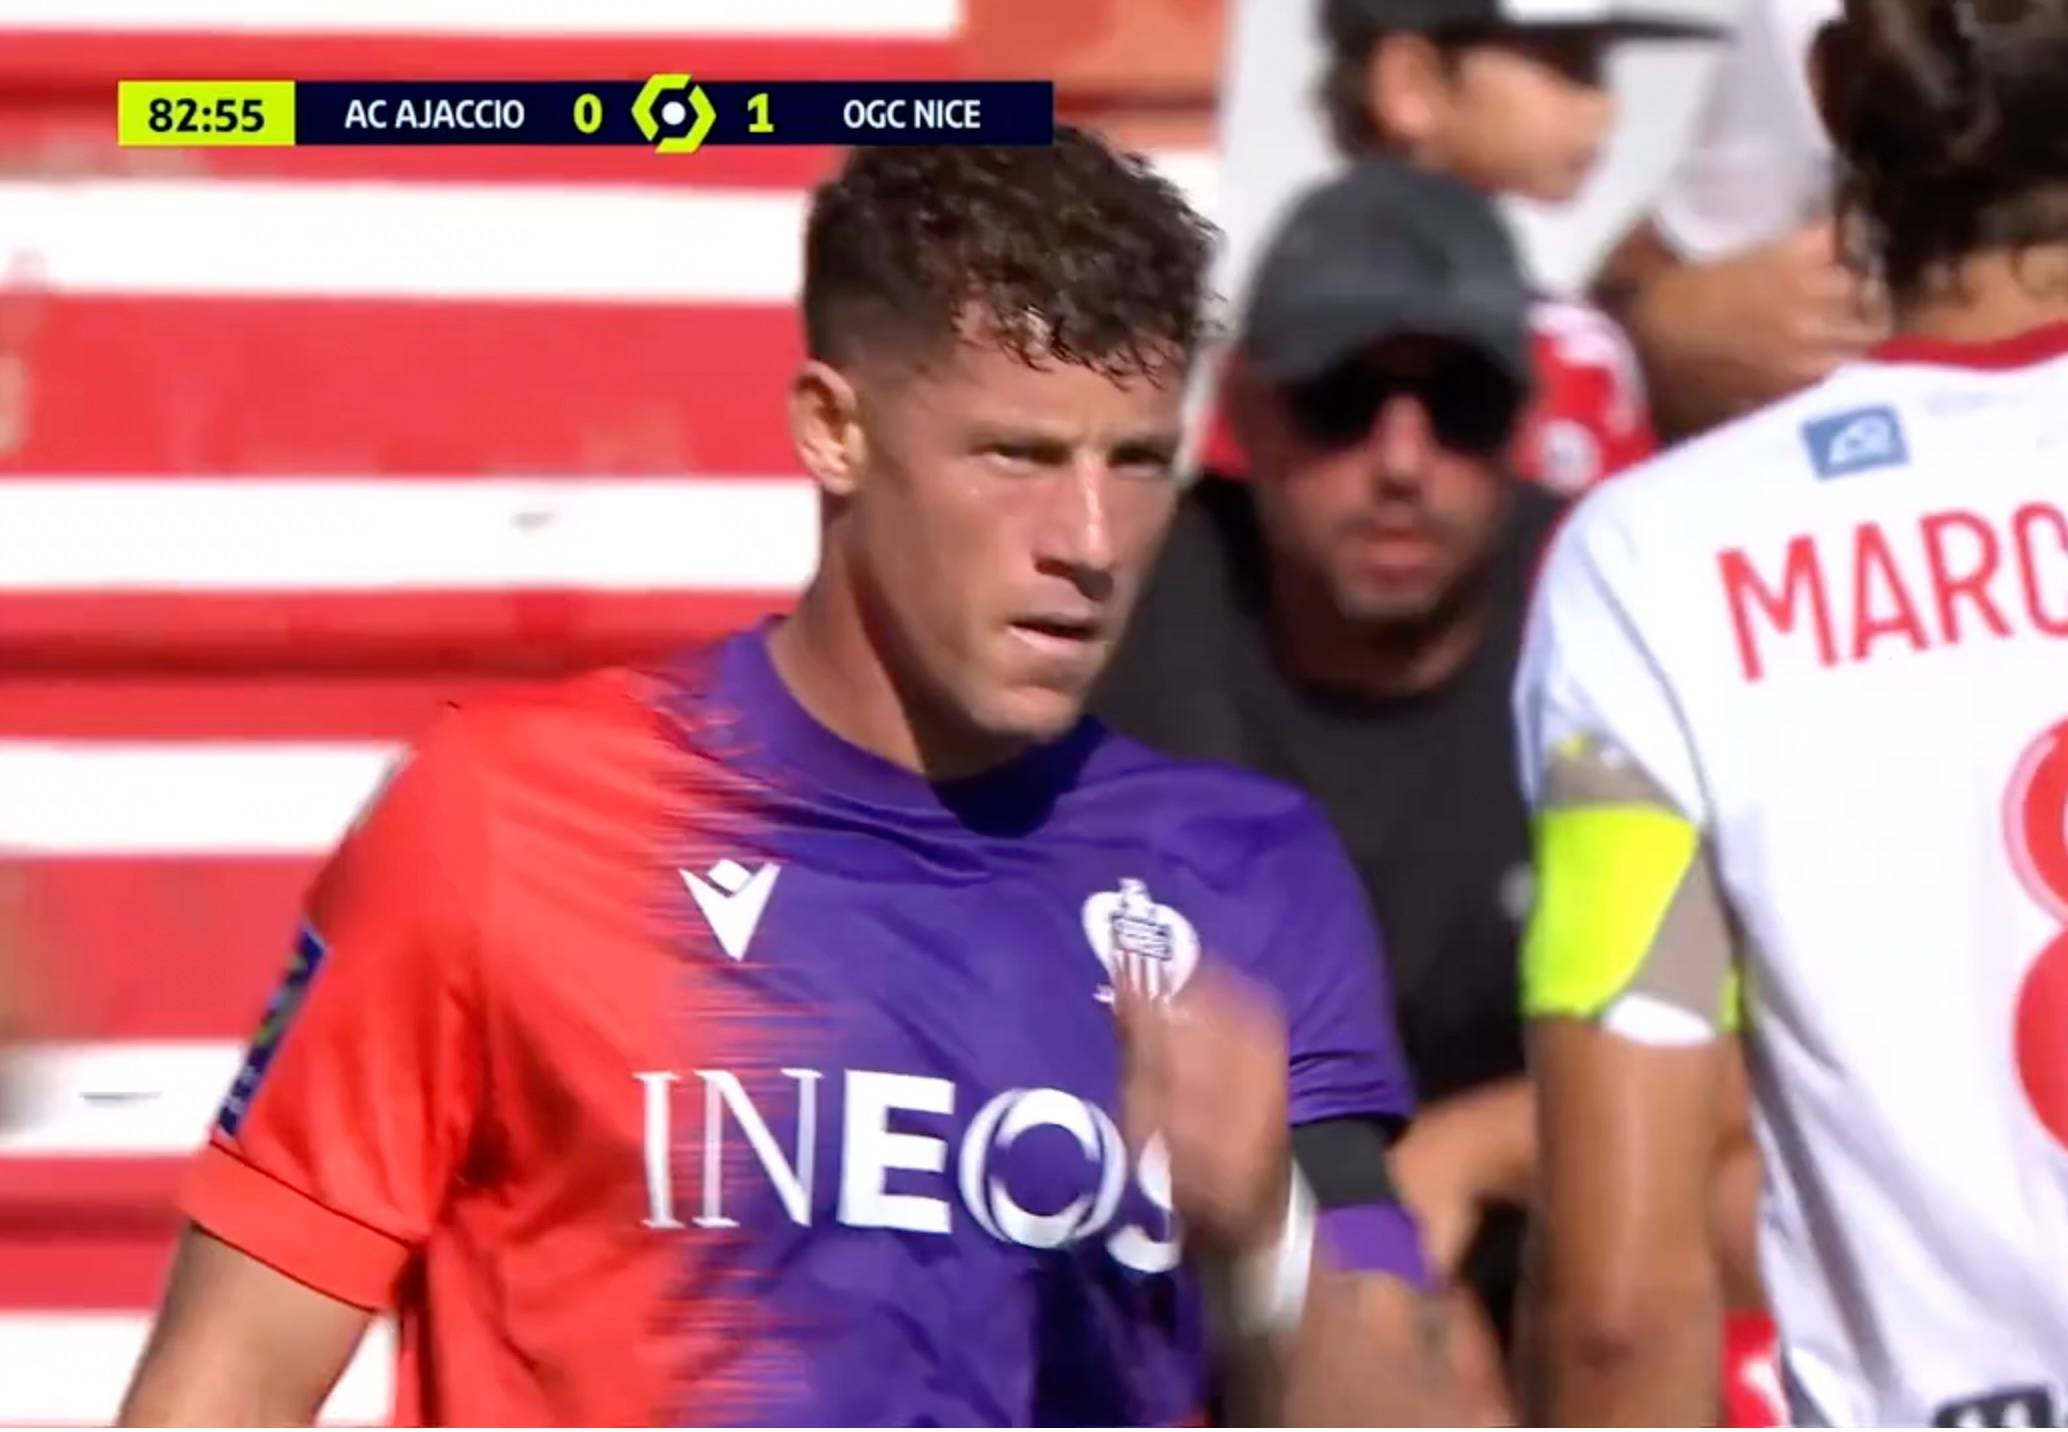 ‘One we’ve been waiting for’ - Ross Barkley is already making a positive impact at Nice